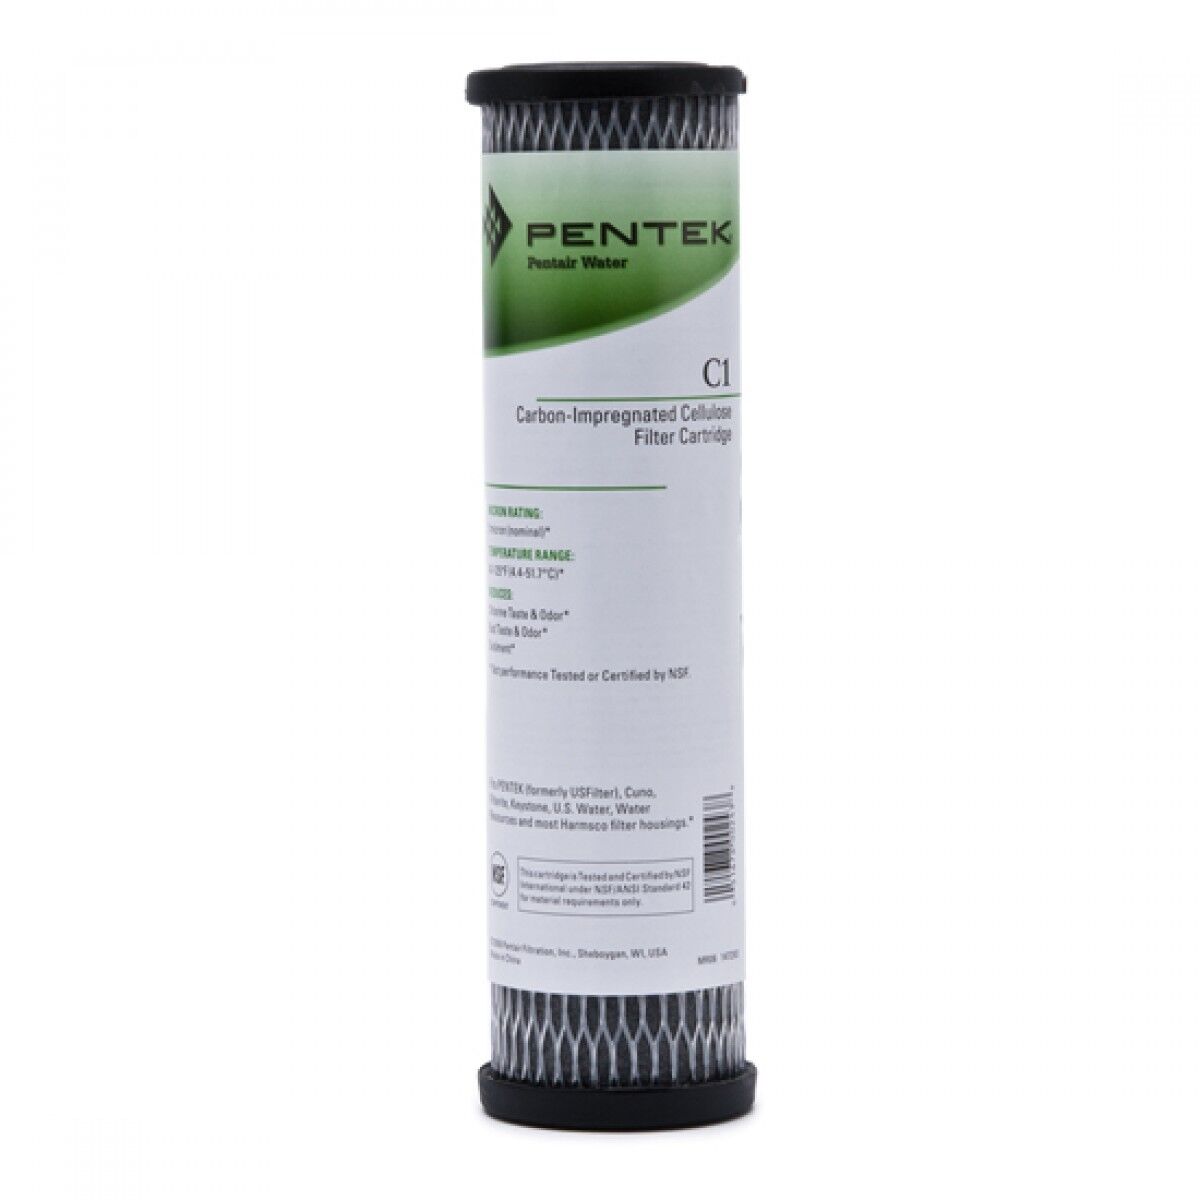 Standard 10" Carbon-Impregnated Premium Pleated Filter Cartridge, 5-Micron. Great for Sediment and Chlorine, Taste and Odor.